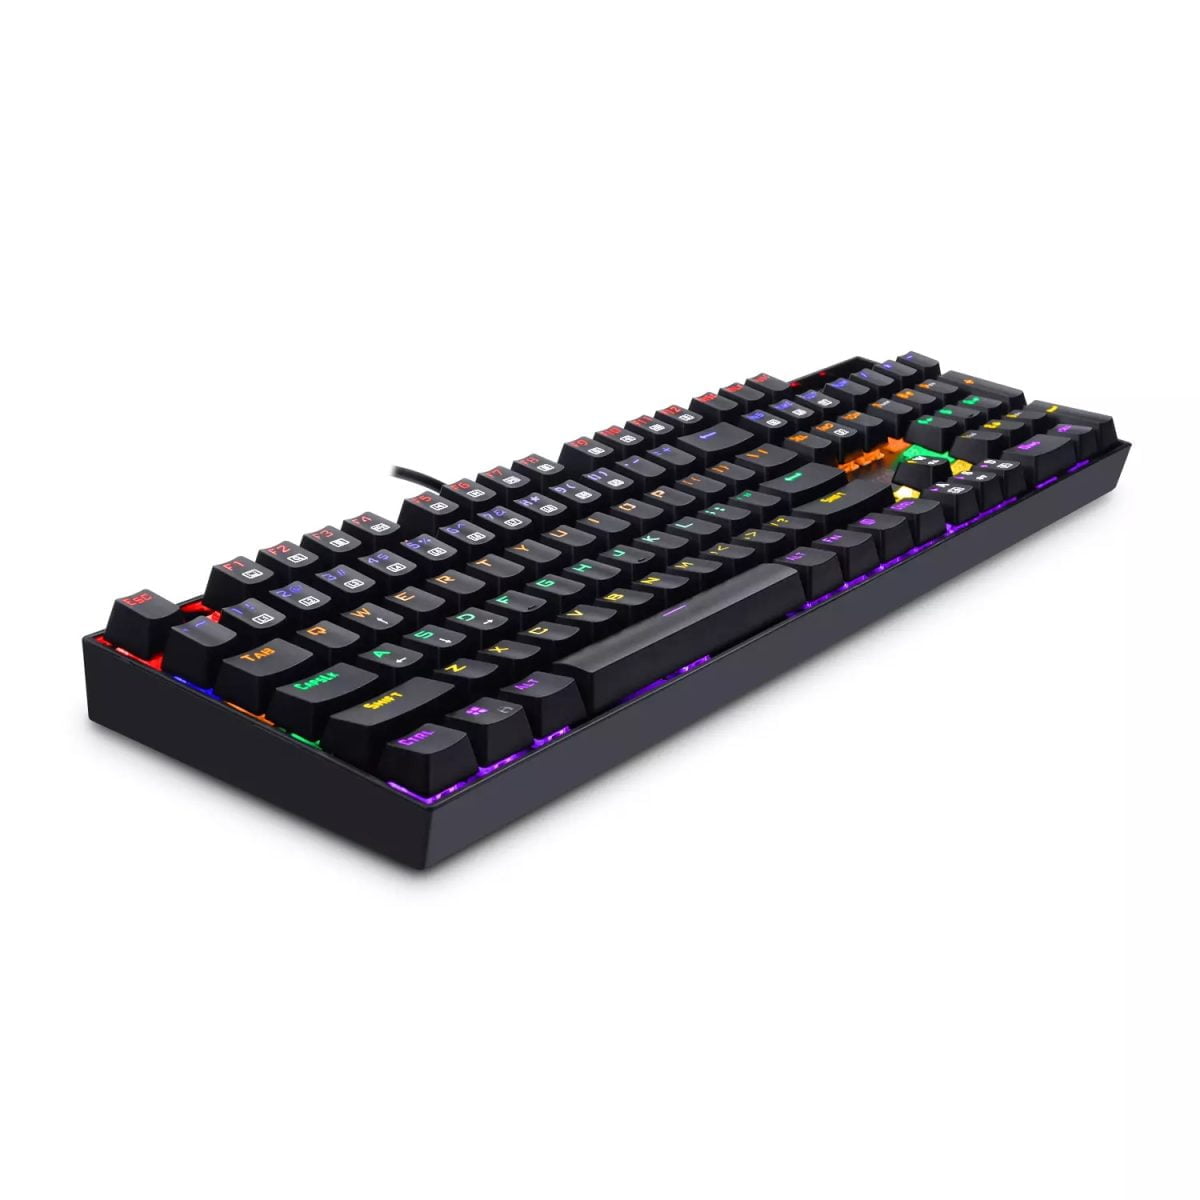 K551 Kr 4 Redragon &Lt;H1 Class=&Quot;Product_Title Entry-Title&Quot;&Gt;Vara K551-Kr Gaming Keyboard, Blue Switch&Lt;/H1&Gt; &Lt;Table Class=&Quot;Woocommerce-Product-Attributes Shop_Attributes&Quot;&Gt; &Lt;Tbody&Gt; &Lt;Tr Class=&Quot;Woocommerce-Product-Attributes-Item Woocommerce-Product-Attributes-Item--Attribute_Pa_Keyboard-Type&Quot;&Gt; &Lt;Th Class=&Quot;Woocommerce-Product-Attributes-Item__Label&Quot;&Gt;Type&Lt;/Th&Gt; &Lt;Td Class=&Quot;Woocommerce-Product-Attributes-Item__Value&Quot;&Gt;Mechanical&Lt;/Td&Gt; &Lt;/Tr&Gt; &Lt;Tr Class=&Quot;Woocommerce-Product-Attributes-Item Woocommerce-Product-Attributes-Item--Attribute_Pa_Connection&Quot;&Gt; &Lt;Th Class=&Quot;Woocommerce-Product-Attributes-Item__Label&Quot;&Gt;Connection&Lt;/Th&Gt; &Lt;Td Class=&Quot;Woocommerce-Product-Attributes-Item__Value&Quot;&Gt;Wired&Lt;/Td&Gt; &Lt;/Tr&Gt; &Lt;Tr Class=&Quot;Woocommerce-Product-Attributes-Item Woocommerce-Product-Attributes-Item--Attribute_Pa_Full-Key-Anti-Ghosting&Quot;&Gt; &Lt;Th Class=&Quot;Woocommerce-Product-Attributes-Item__Label&Quot;&Gt;Full Key Anti-Ghosting&Lt;/Th&Gt; &Lt;Td Class=&Quot;Woocommerce-Product-Attributes-Item__Value&Quot;&Gt;Yes&Lt;/Td&Gt; &Lt;/Tr&Gt; &Lt;Tr Class=&Quot;Woocommerce-Product-Attributes-Item Woocommerce-Product-Attributes-Item--Attribute_Pa_Keys&Quot;&Gt; &Lt;Th Class=&Quot;Woocommerce-Product-Attributes-Item__Label&Quot;&Gt;Keys&Lt;/Th&Gt; &Lt;Td Class=&Quot;Woocommerce-Product-Attributes-Item__Value&Quot;&Gt;104 Keys, 12 Multimedia Keys&Lt;/Td&Gt; &Lt;/Tr&Gt; &Lt;Tr Class=&Quot;Woocommerce-Product-Attributes-Item Woocommerce-Product-Attributes-Item--Attribute_Pa_Lighting-Effects&Quot;&Gt; &Lt;Th Class=&Quot;Woocommerce-Product-Attributes-Item__Label&Quot;&Gt;Lighting Effects&Lt;/Th&Gt; &Lt;Td Class=&Quot;Woocommerce-Product-Attributes-Item__Value&Quot;&Gt;Rainbow Color Led Backlit Keys&Lt;/Td&Gt; &Lt;/Tr&Gt; &Lt;Tr Class=&Quot;Woocommerce-Product-Attributes-Item Woocommerce-Product-Attributes-Item--Attribute_Pa_Switches&Quot;&Gt; &Lt;Th Class=&Quot;Woocommerce-Product-Attributes-Item__Label&Quot;&Gt;Switches&Lt;/Th&Gt; &Lt;Td Class=&Quot;Woocommerce-Product-Attributes-Item__Value&Quot;&Gt;Blue Switches&Lt;/Td&Gt; &Lt;/Tr&Gt; &Lt;/Tbody&Gt; &Lt;/Table&Gt; Gaming Keyboard Vara K551-Kr Gaming Keyboard